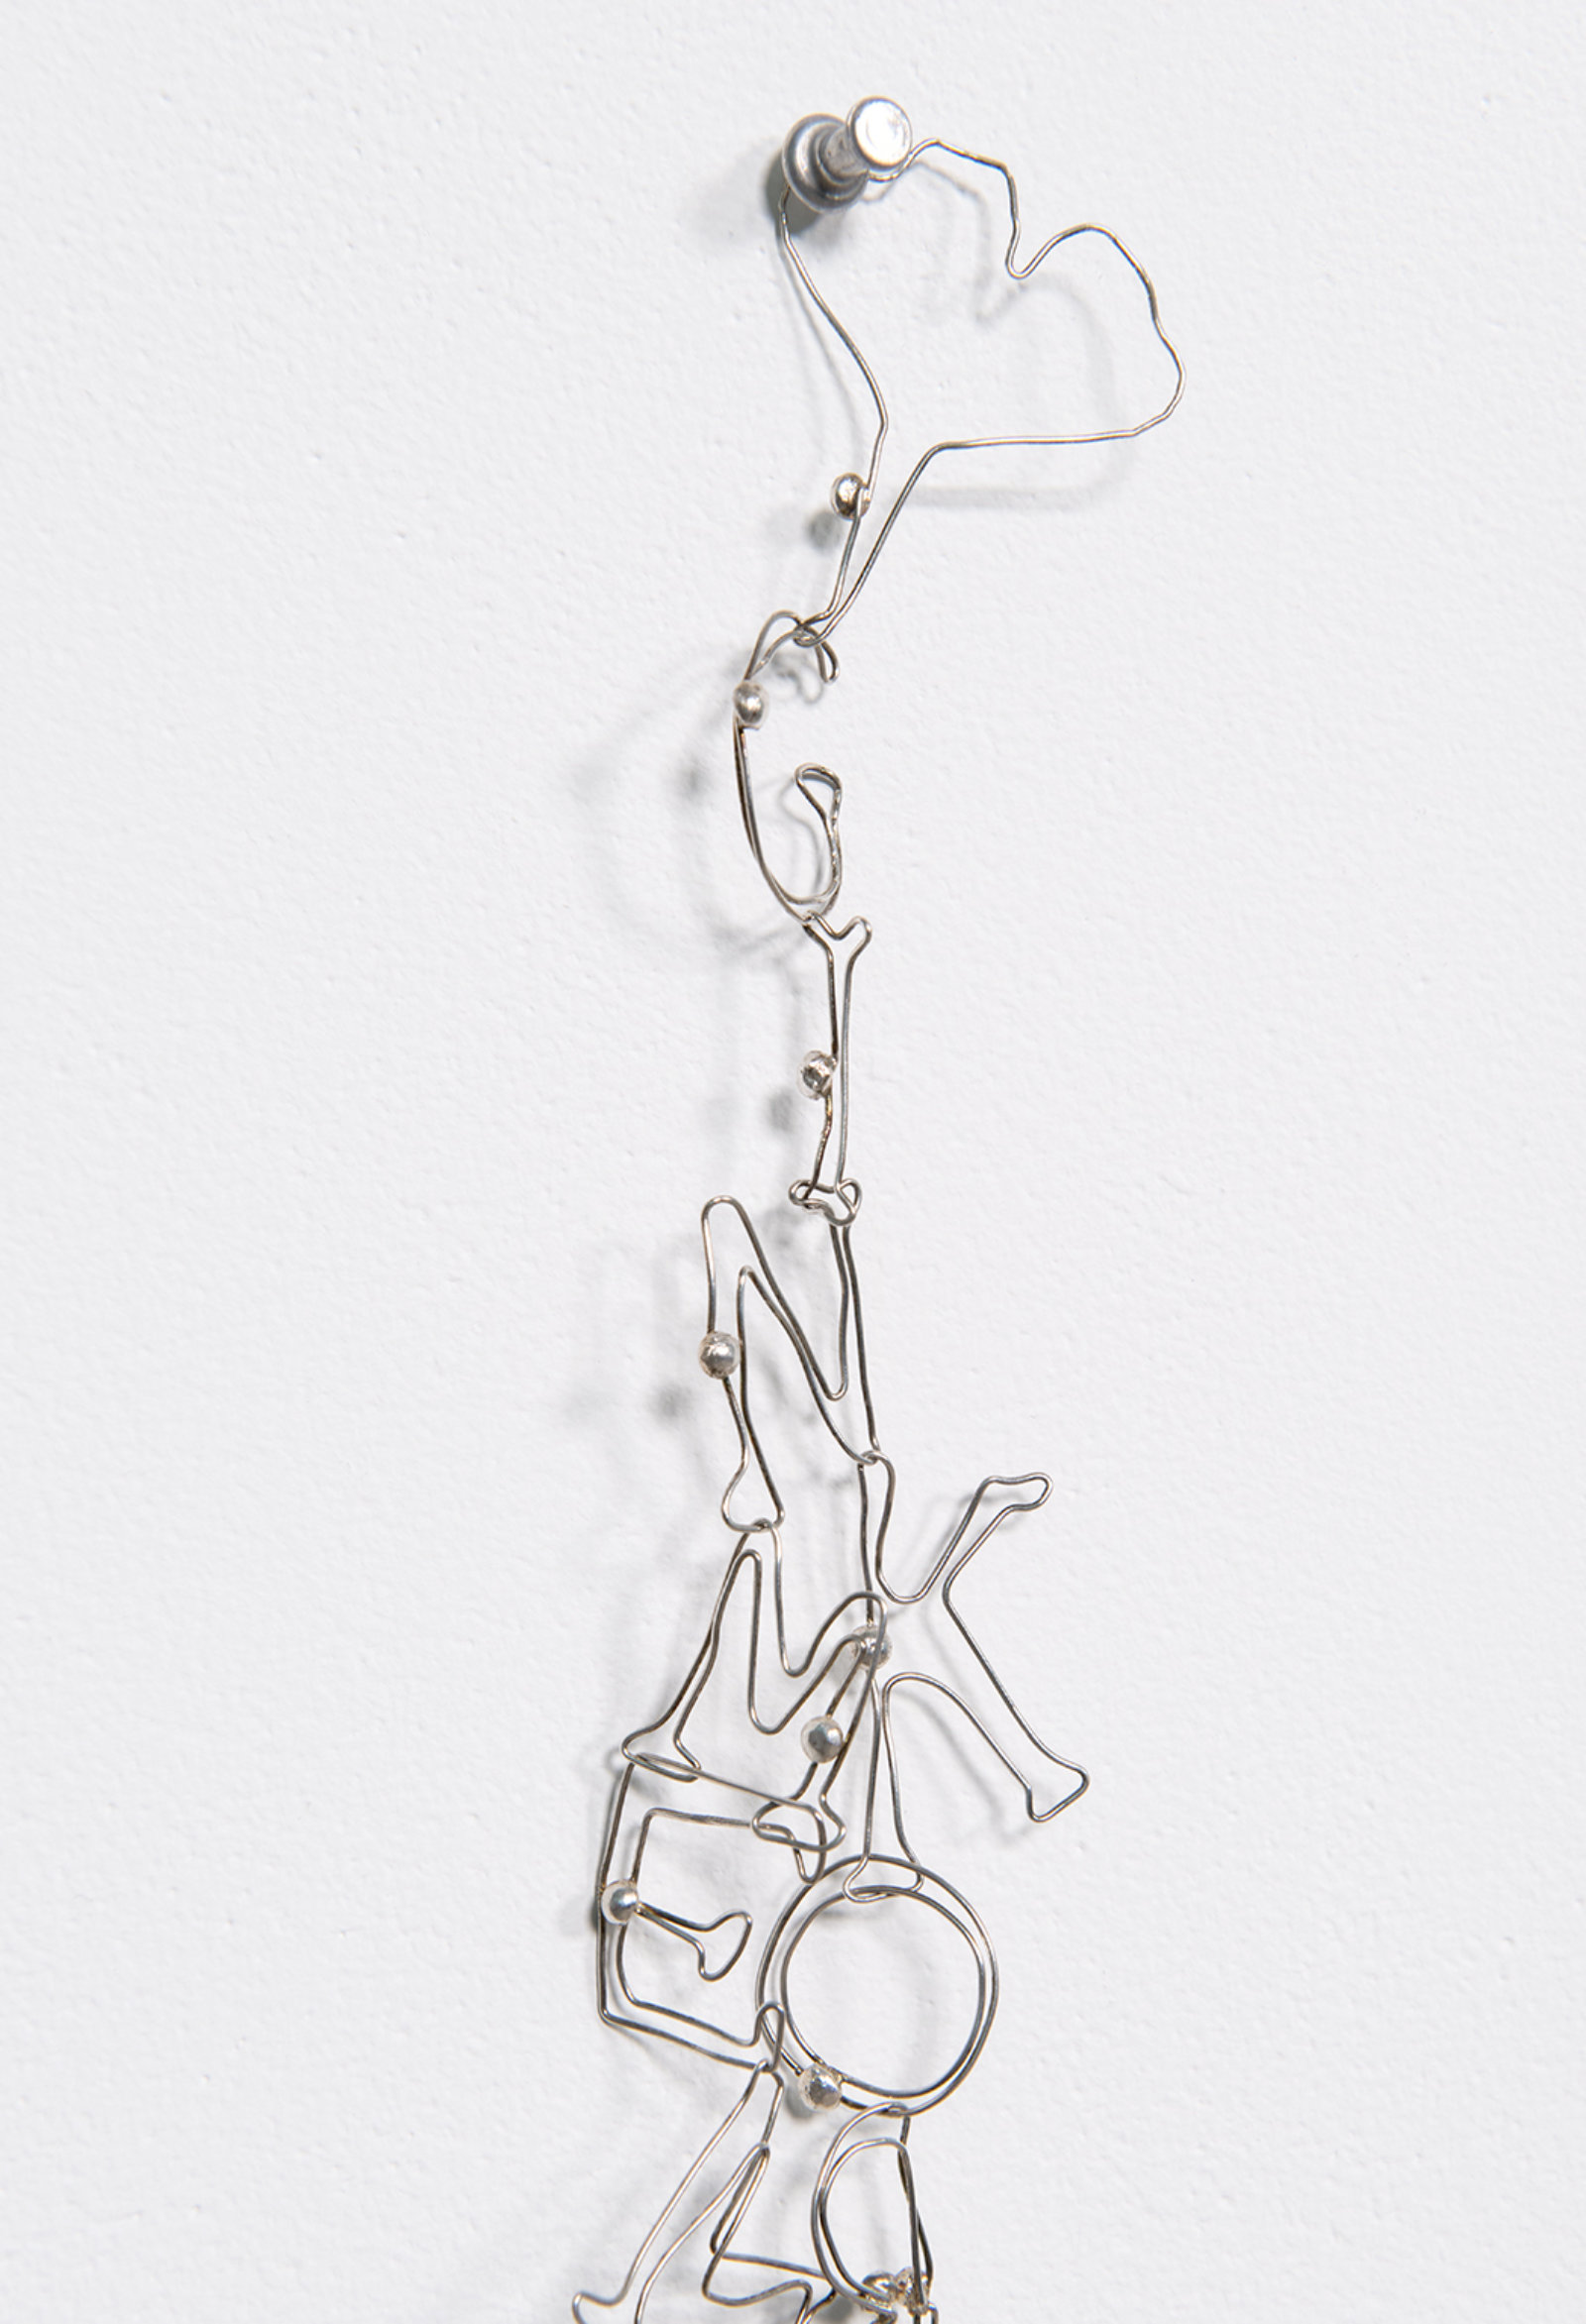 Christina Mackie, Gingko biloba memory tree (The confusion part III) (detail), 2012, silver chain, 21 x 2 x 2 in. (53 x 5 x 4 cm) 